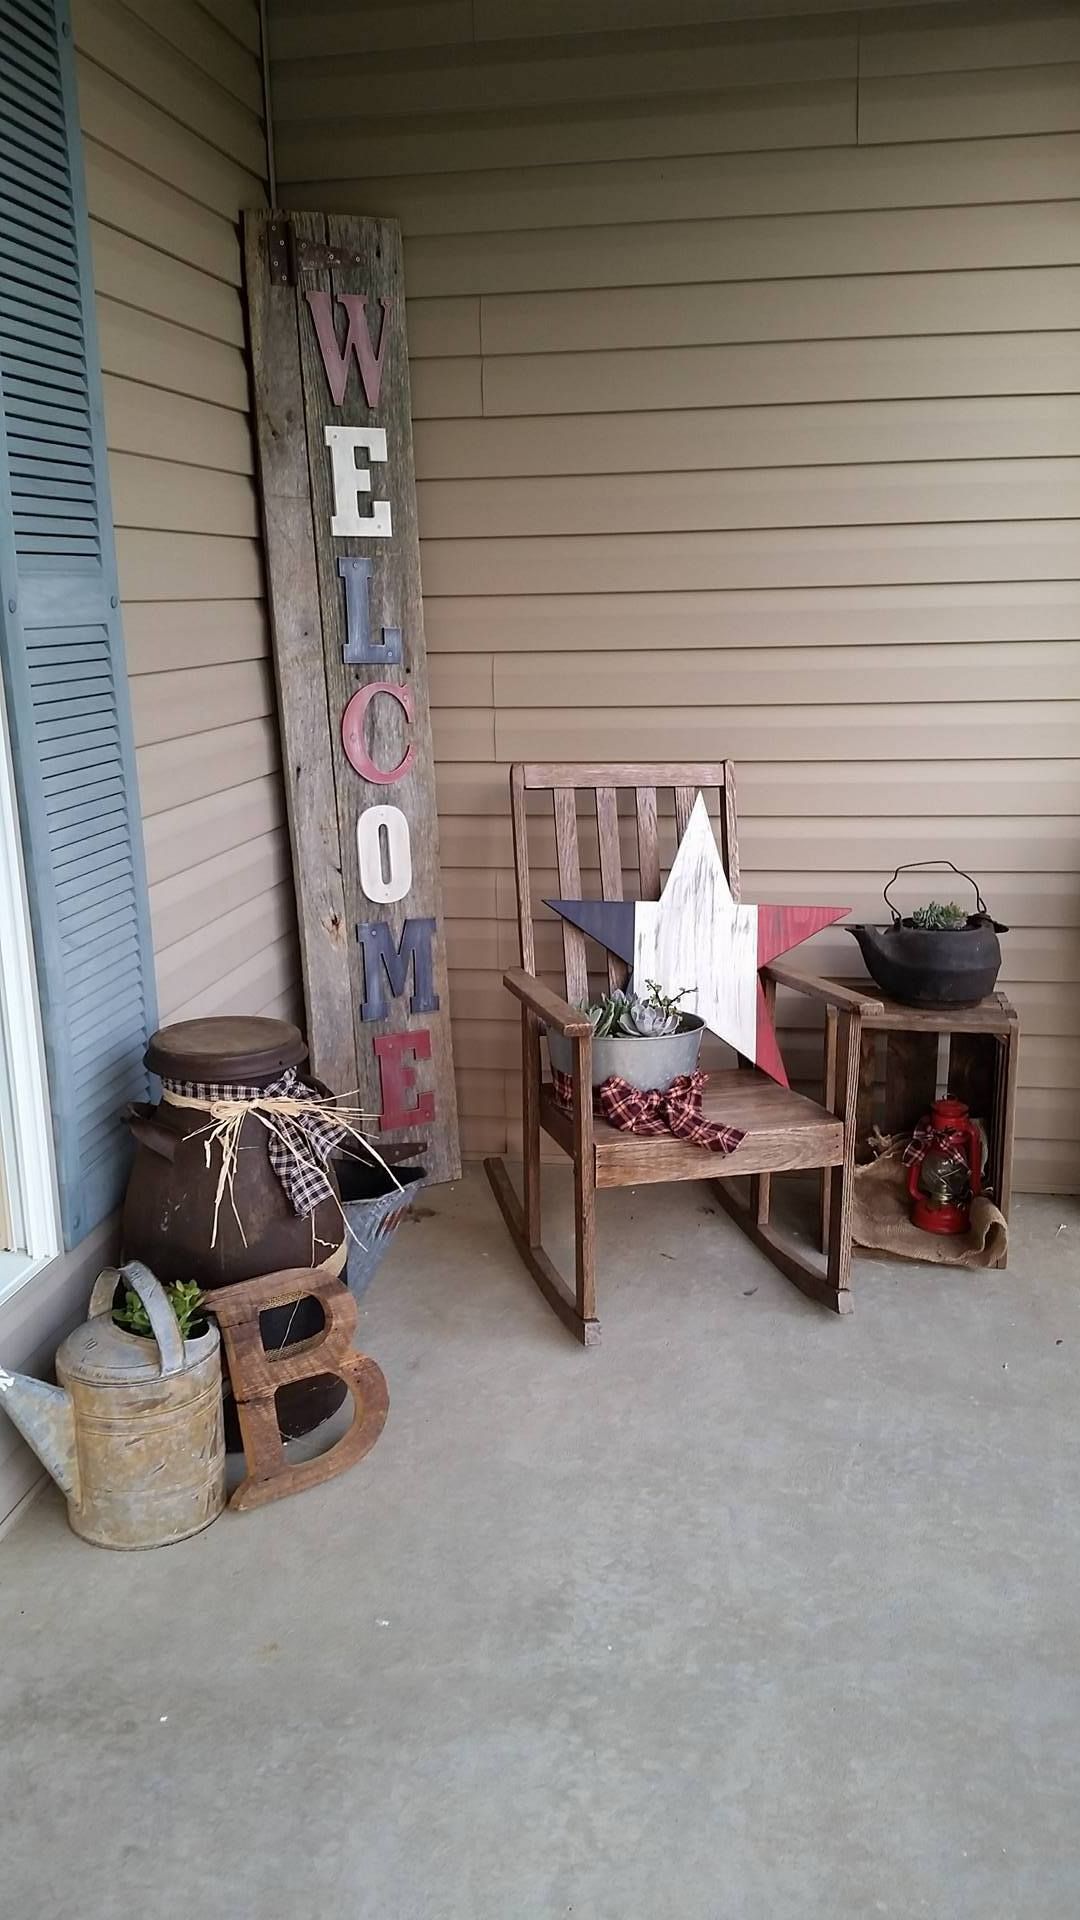 barnwood sign and letter, old chair, old milk can, watering can, cast iron pot all make for a nice decoration on the porch